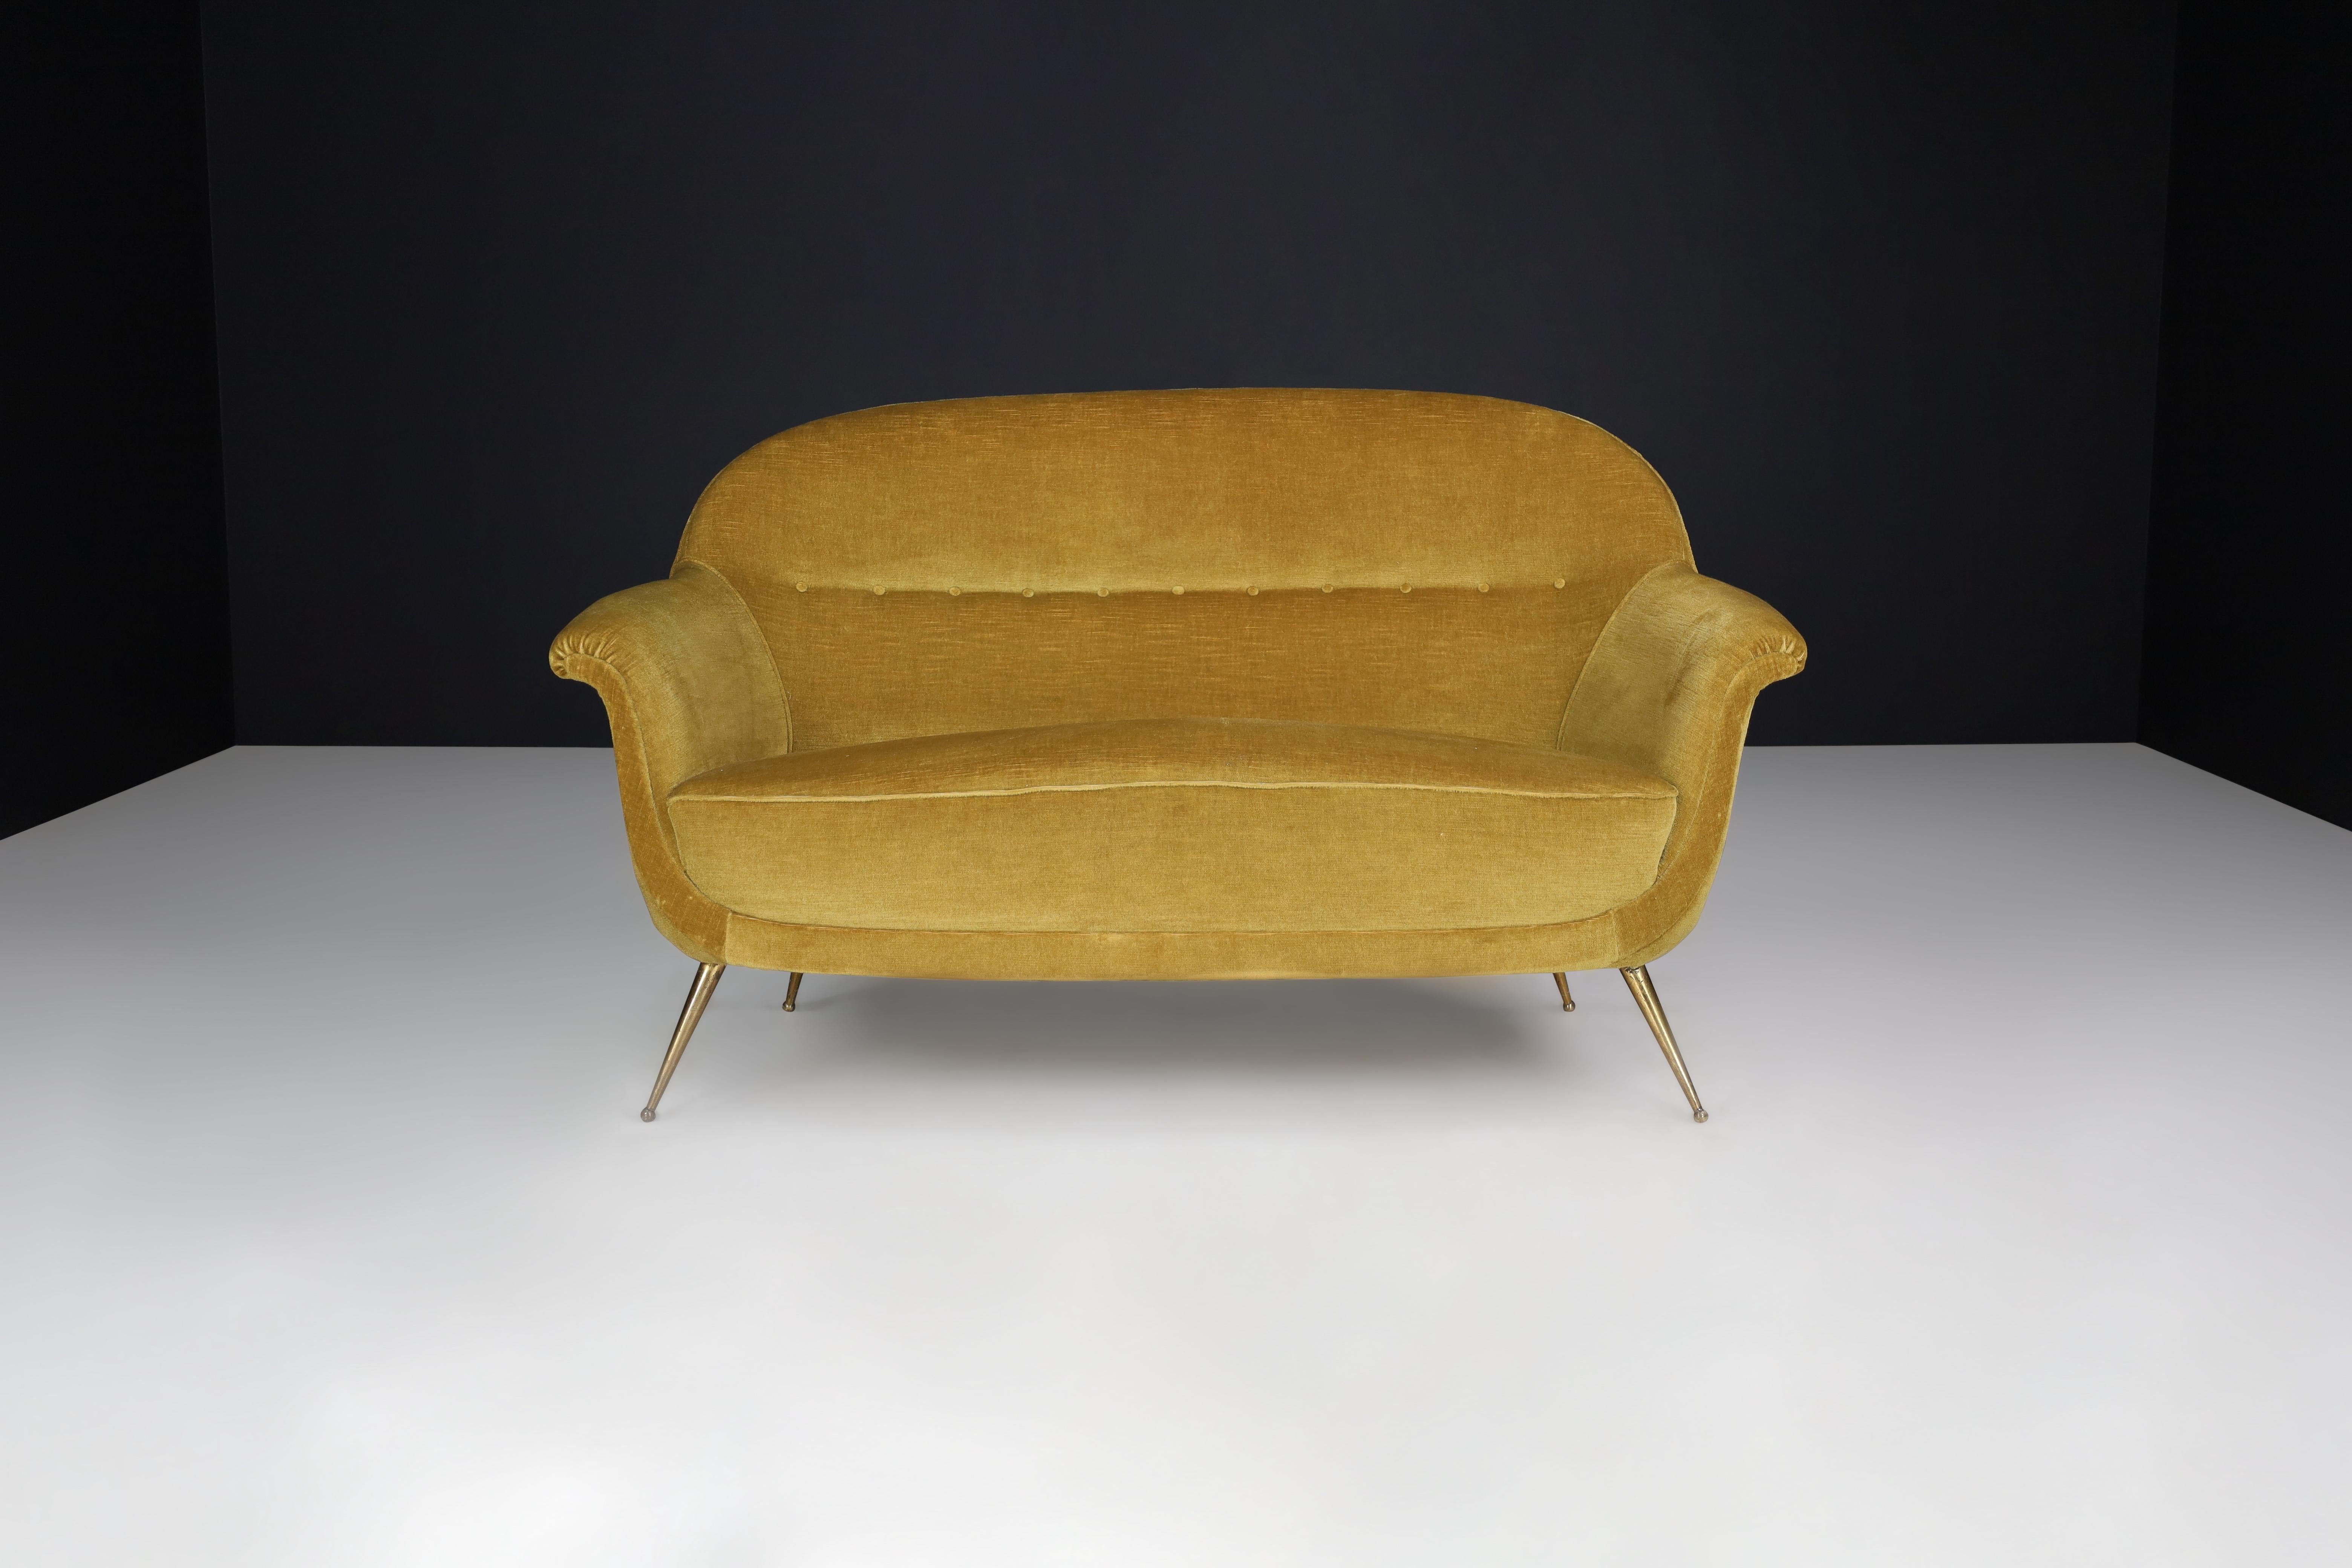 Federico Munari Loveseat in Velvet and Brass, Italy, the 1950s

This is an original loveseat created by Federico Munari in Italy during the 1950s. It features brass feet and is upholstered in original velvet, ensuring maximum comfort. Though it